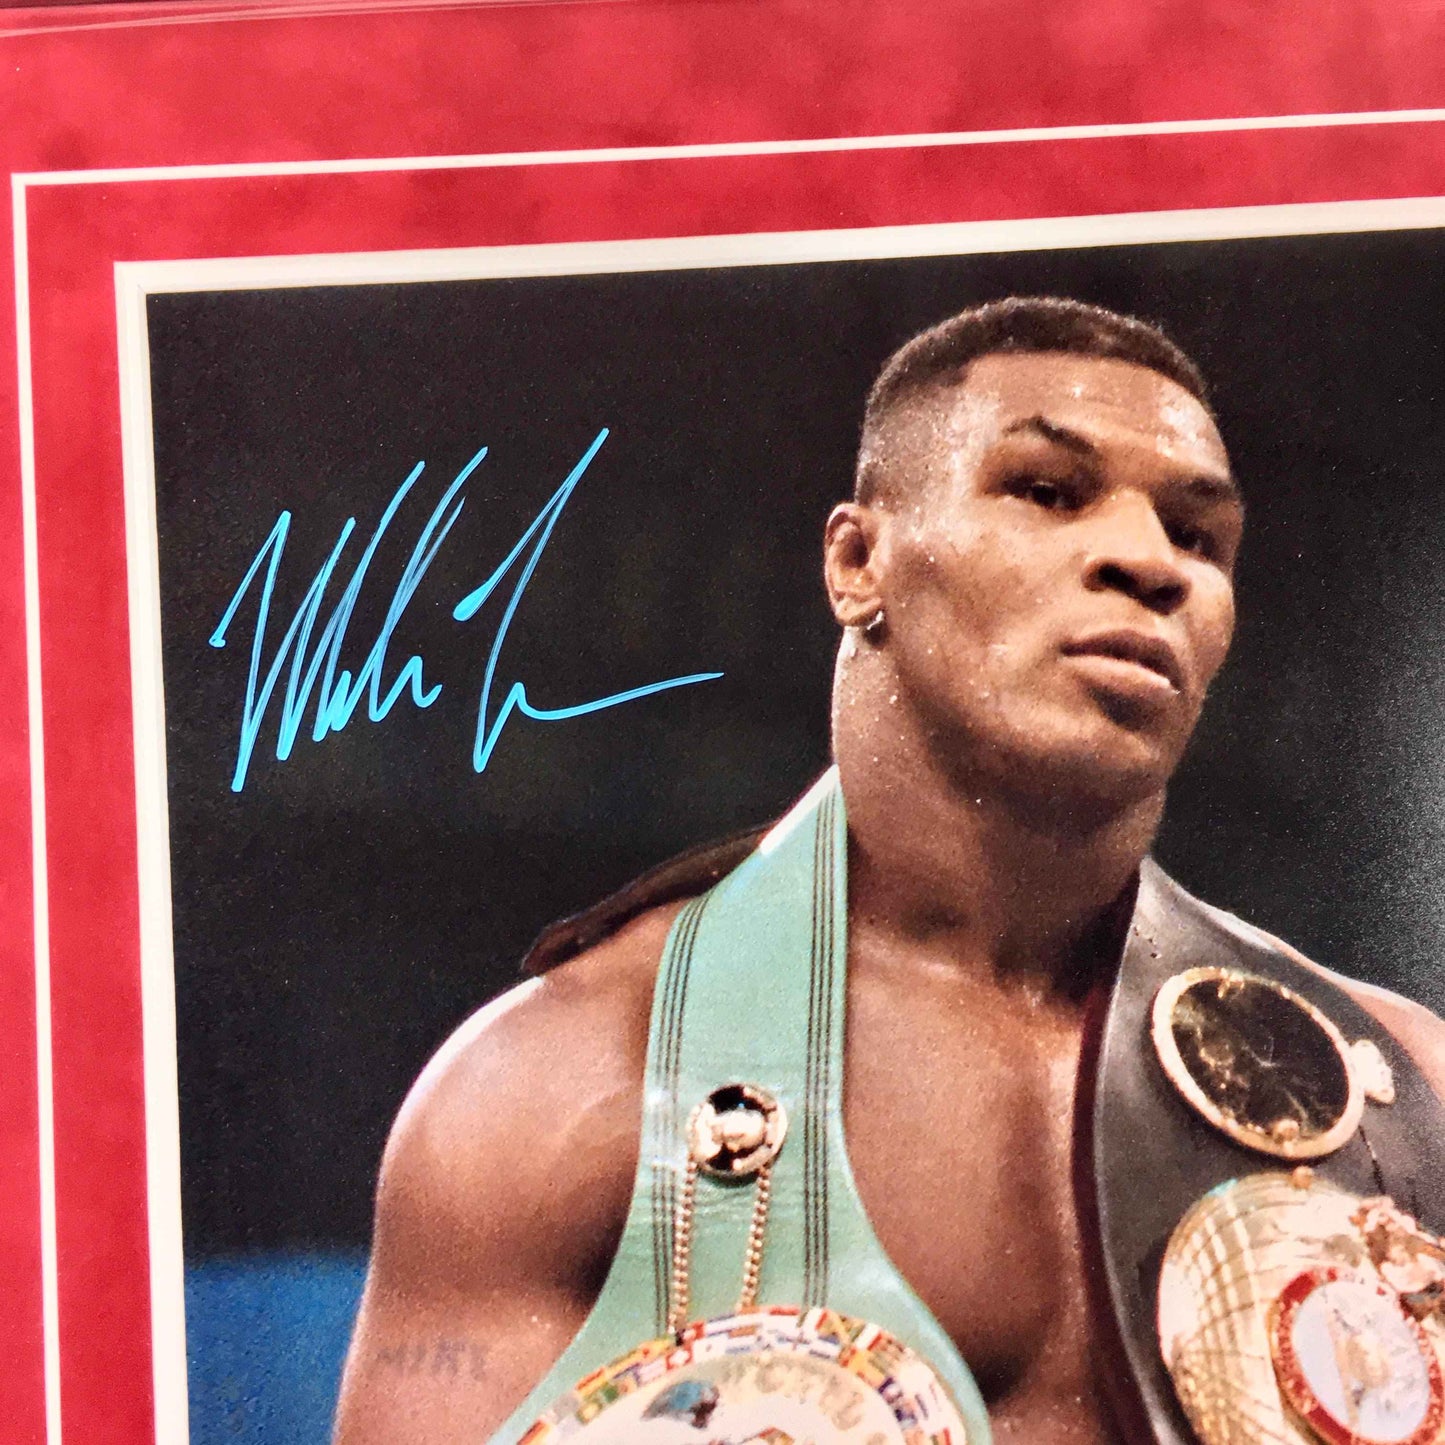 Mike Tyson Signed Photo Framed 16x20